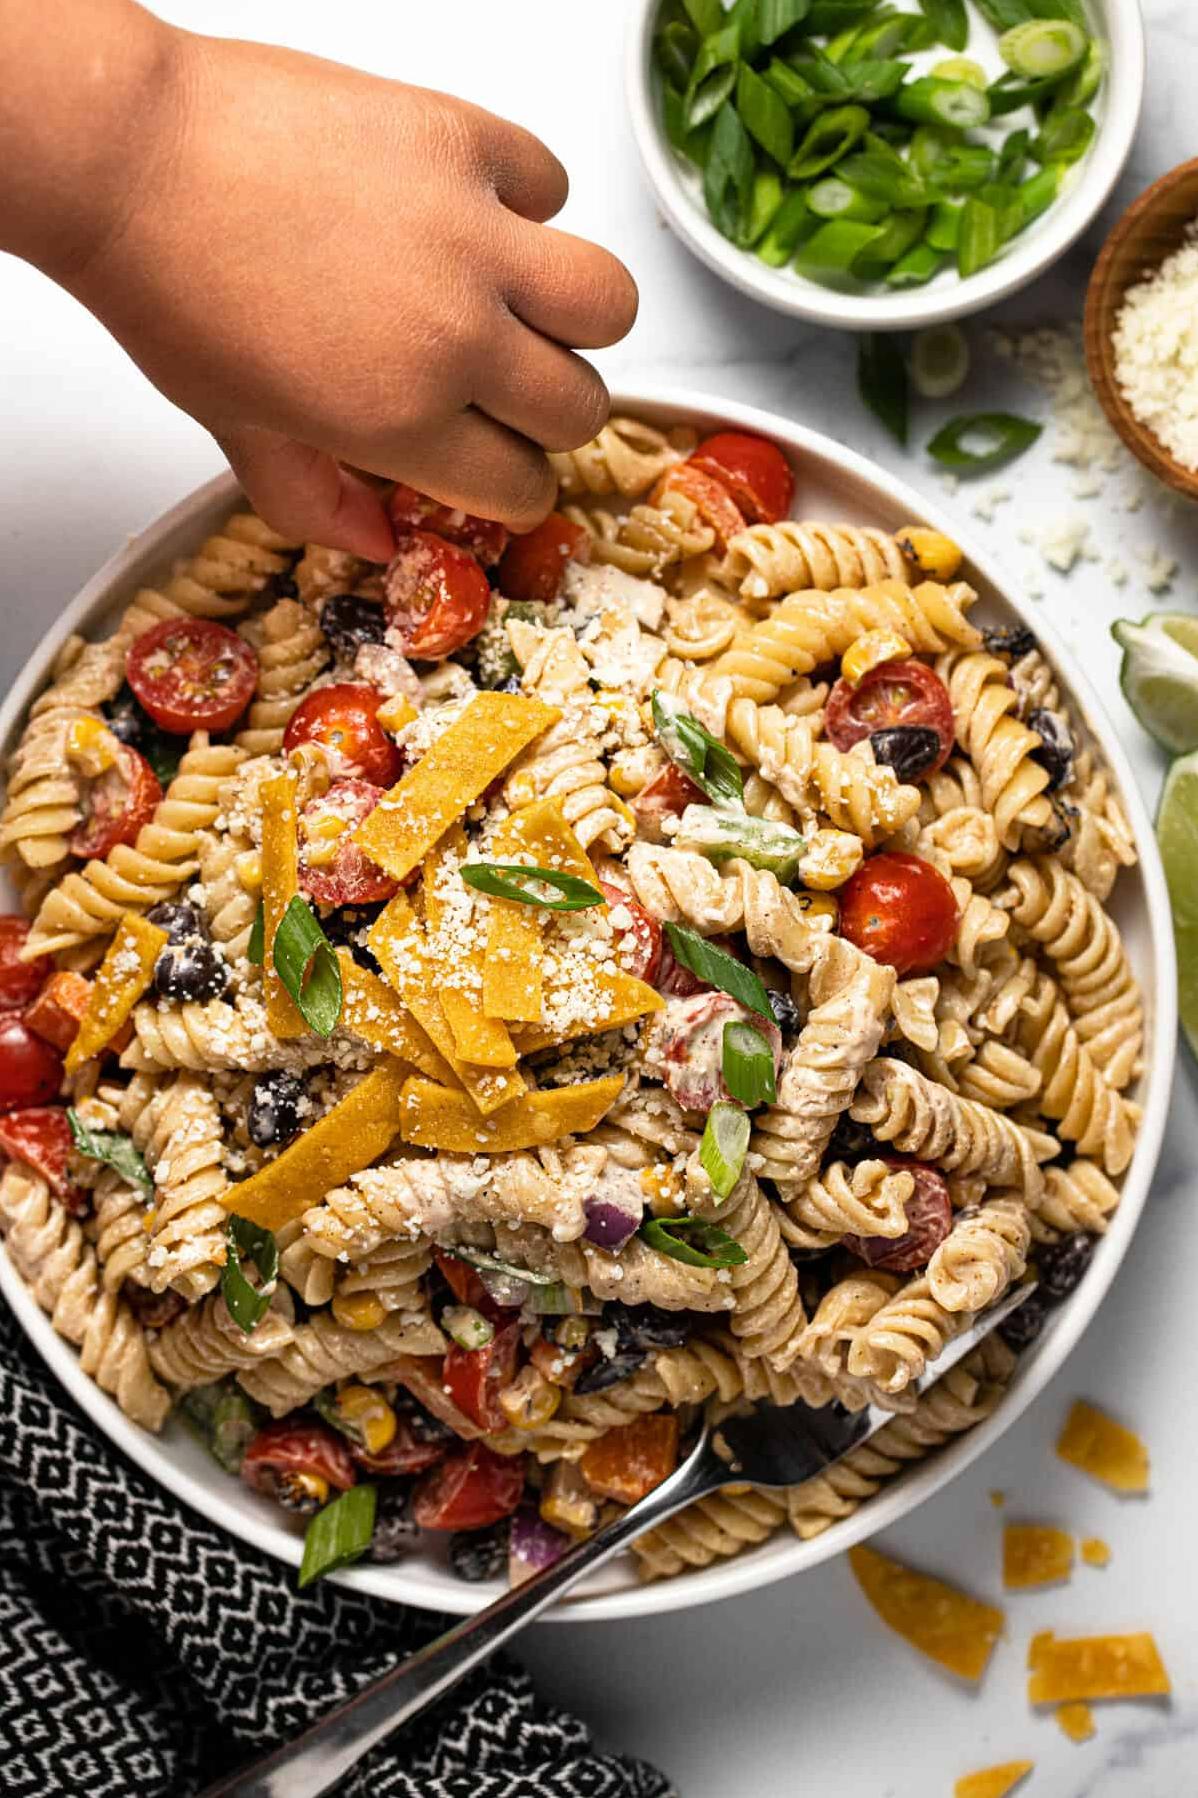  Creamy, flavorful, and packed with incredible textures. That's our vegetarian taco pasta salad for you!